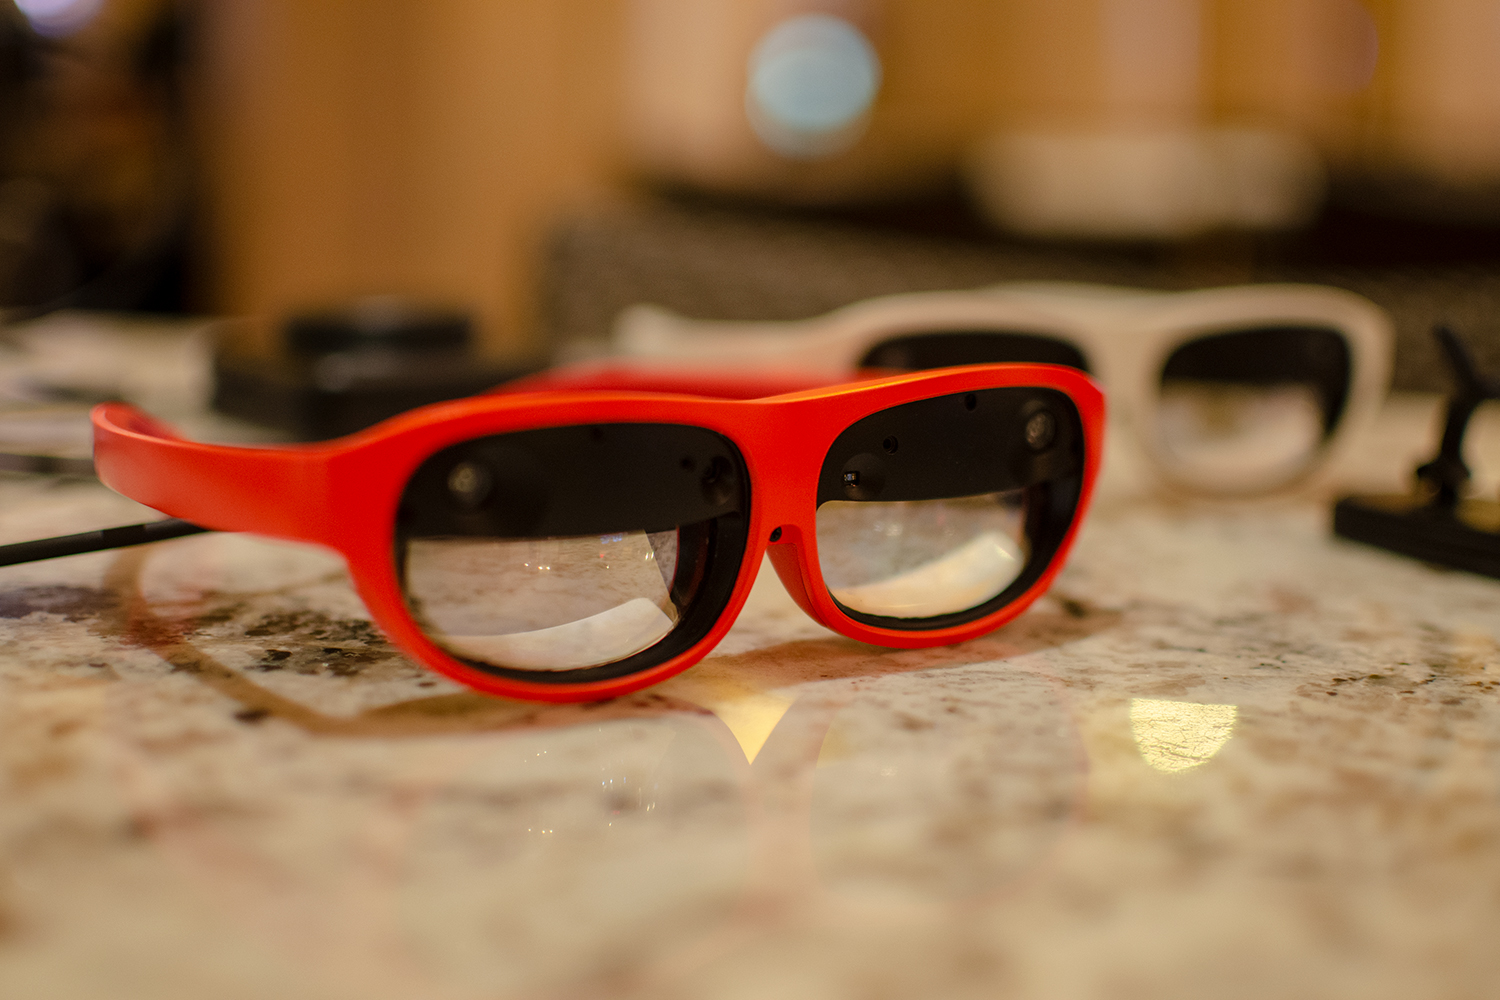 Nreal glasses sit on a table.